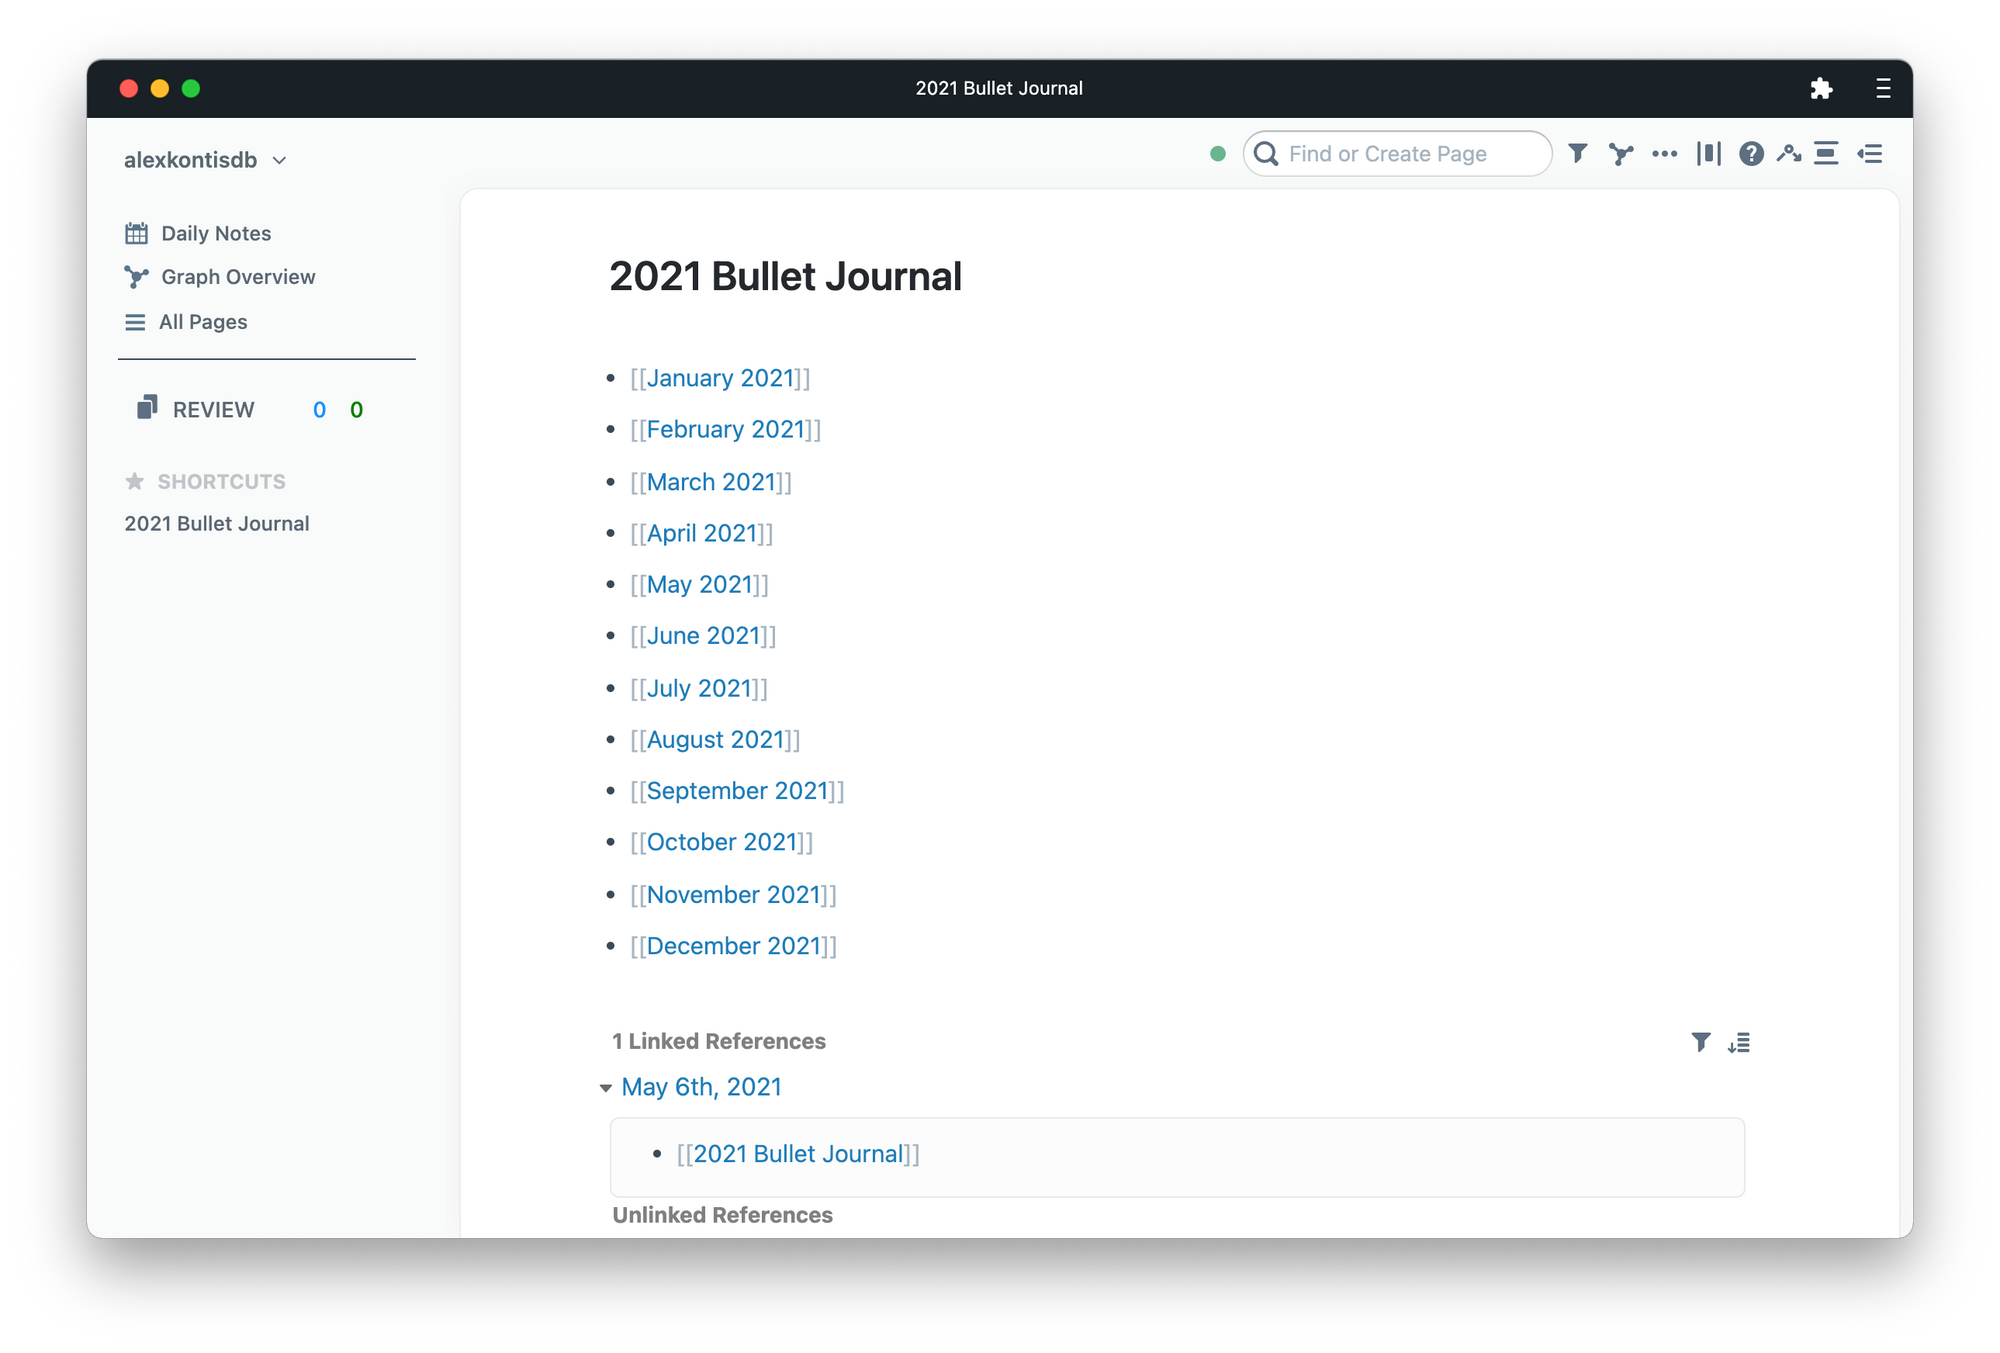 Recreating the Bullet Journal in Roam Research